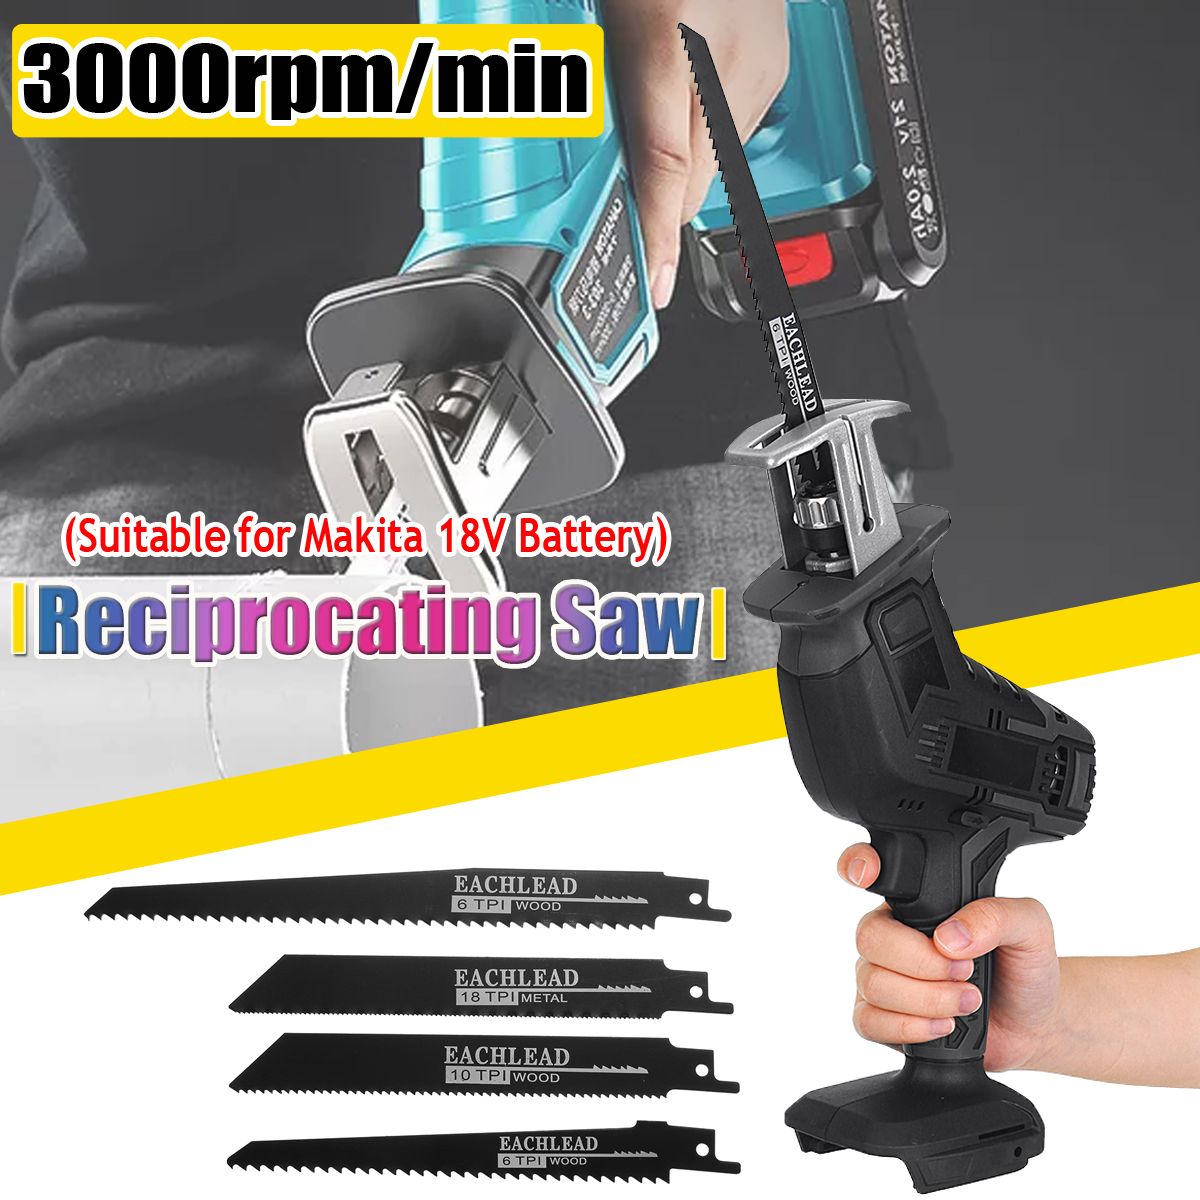 Cordless-Electric-Reciprocating-Saw-Wood-Saber-Cutting-Tool-With-4X-Saw-Blades-For-Makita-18V-Batter-1692528